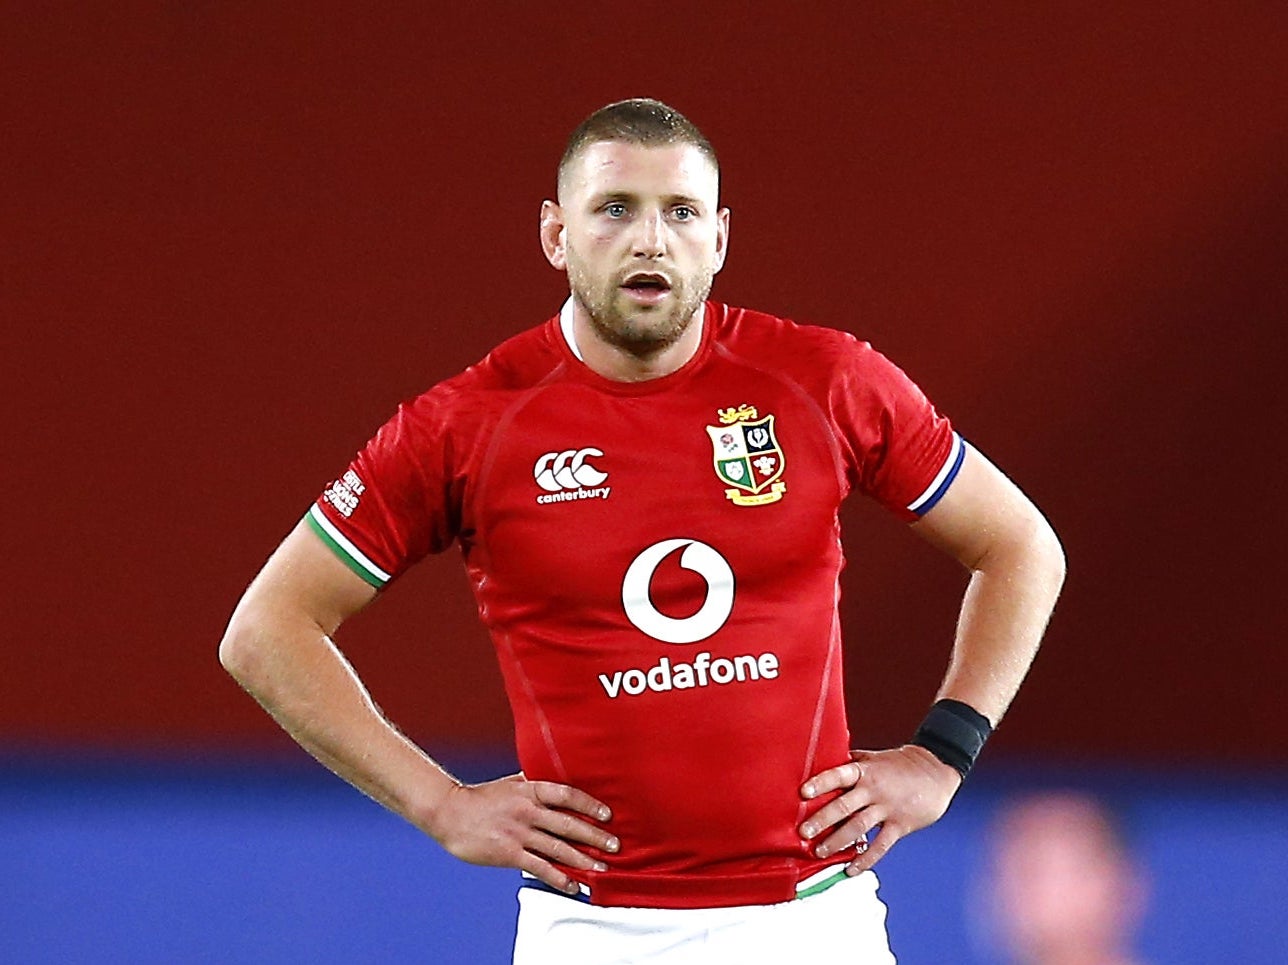 Finn Russell is the only player ruled out for the Lions against South Africa on Saturday